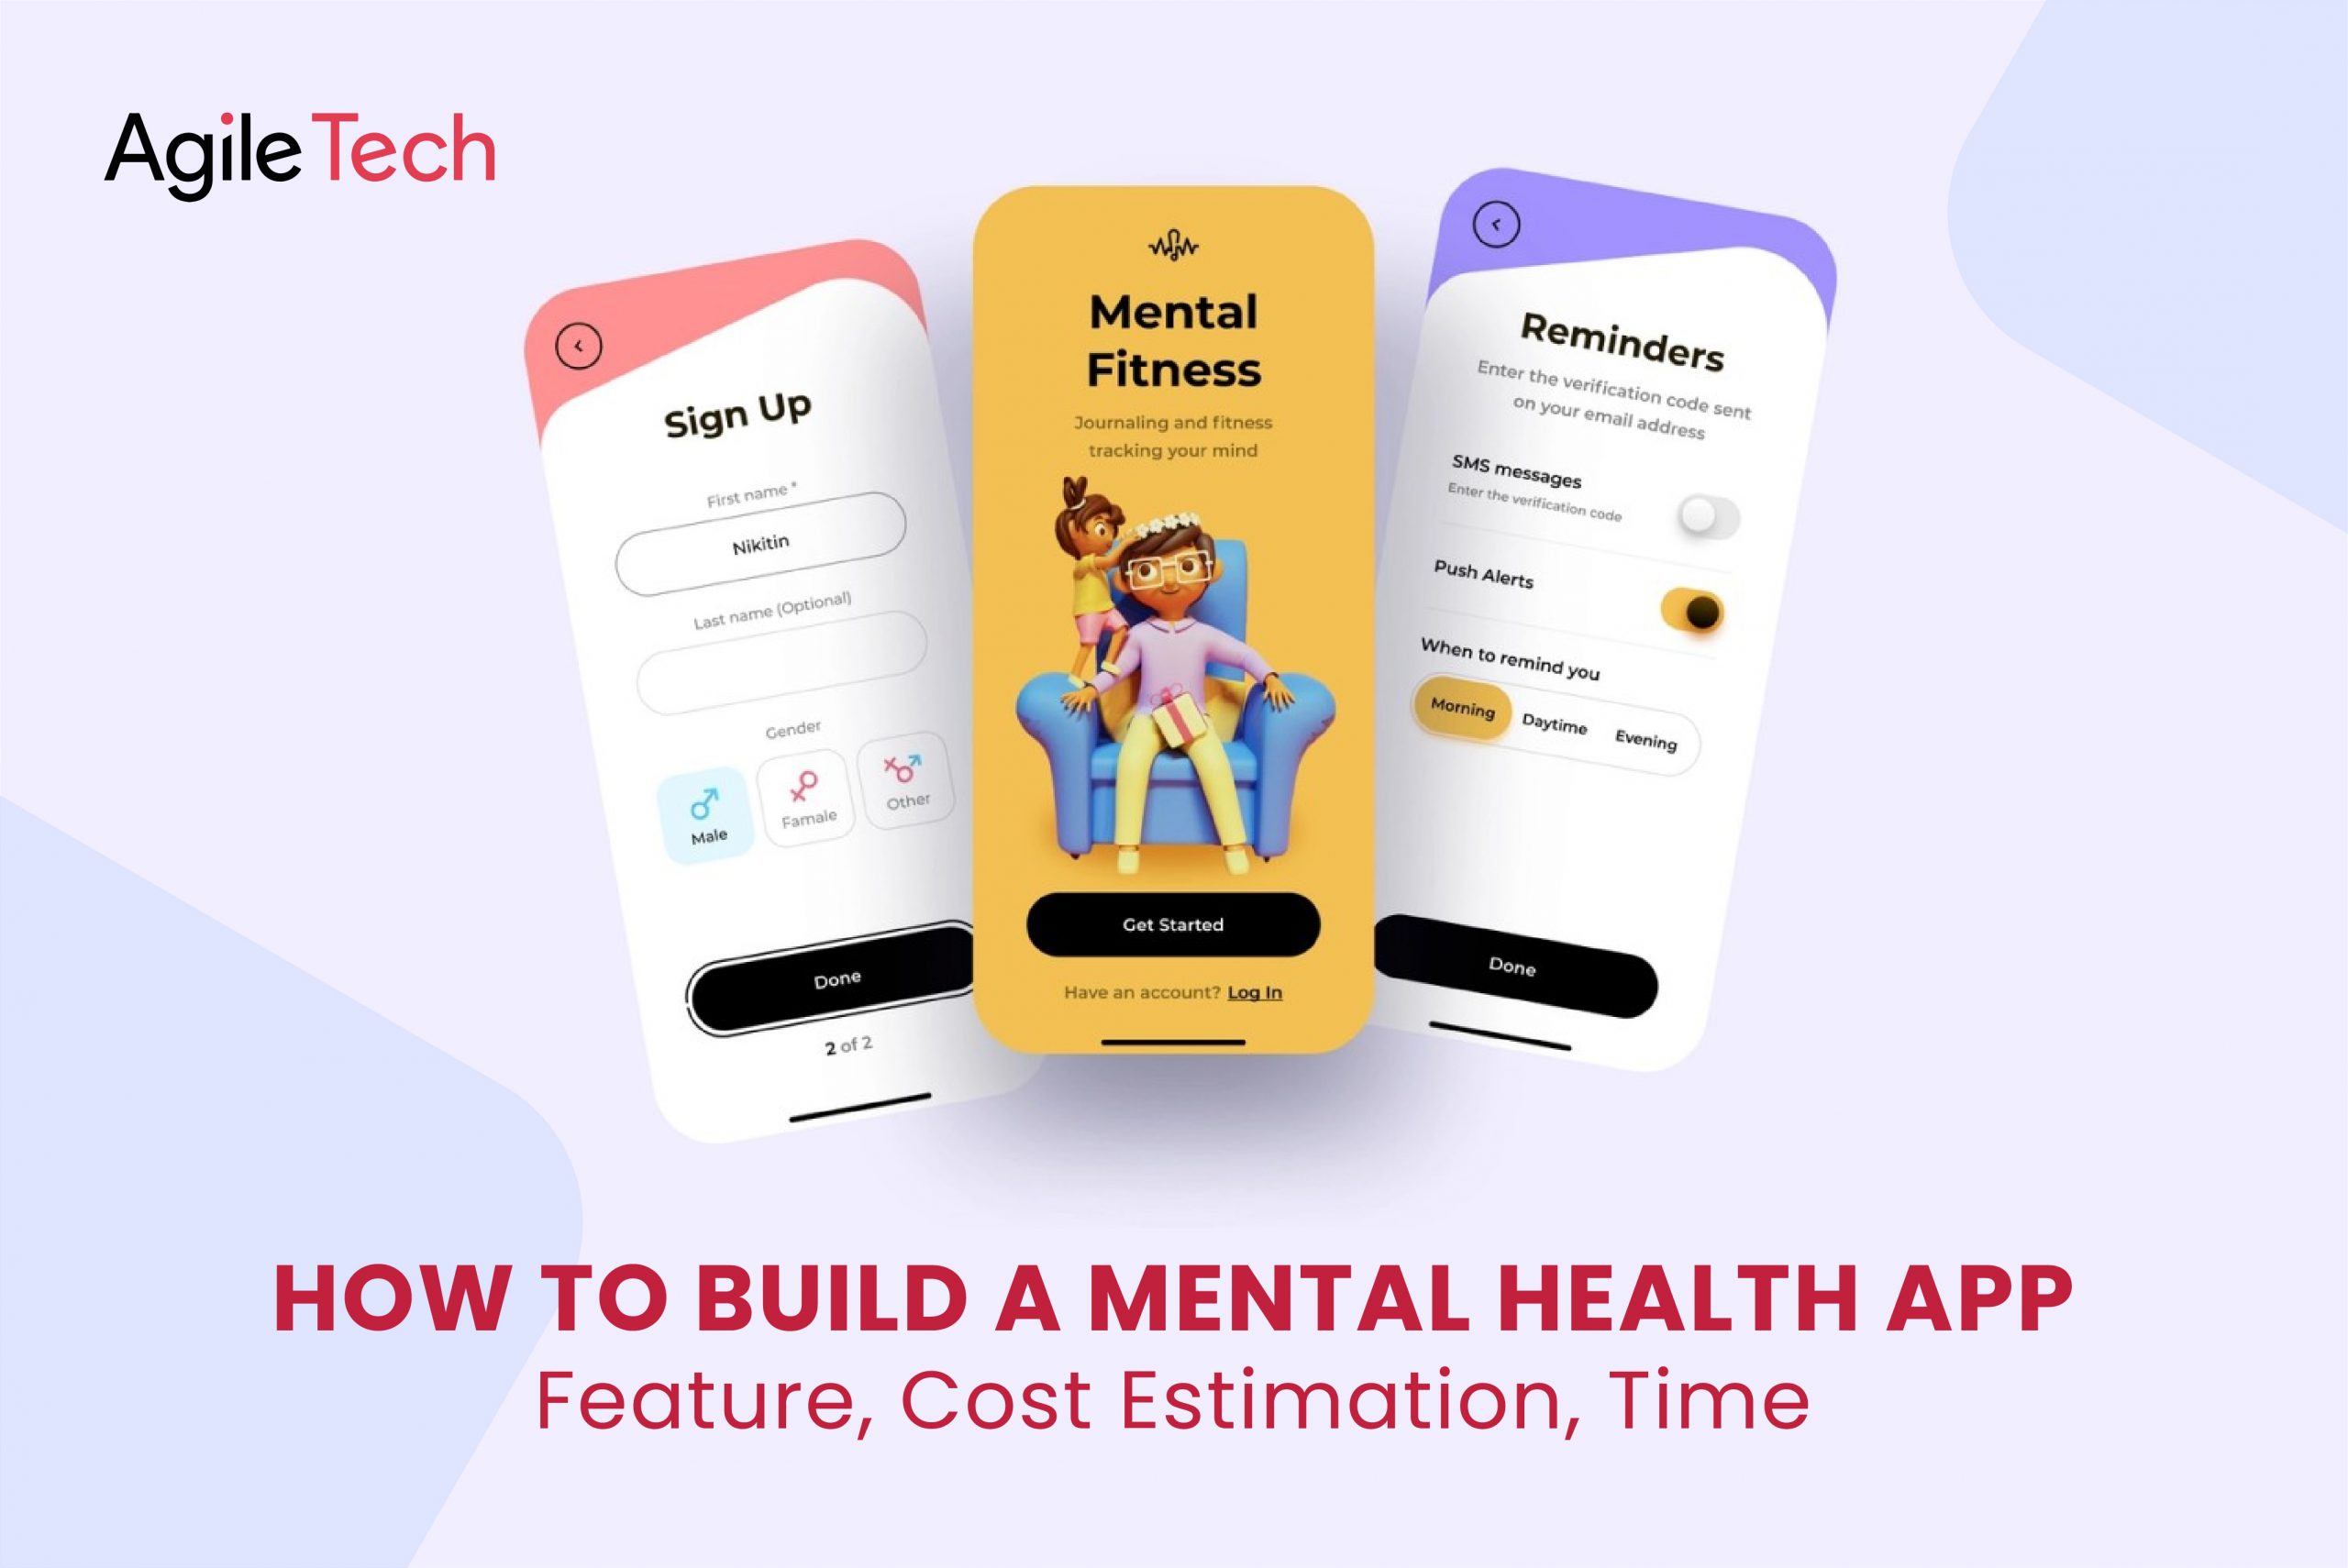 How to build a Mental Health App: Feature, Cost Estimation, Time